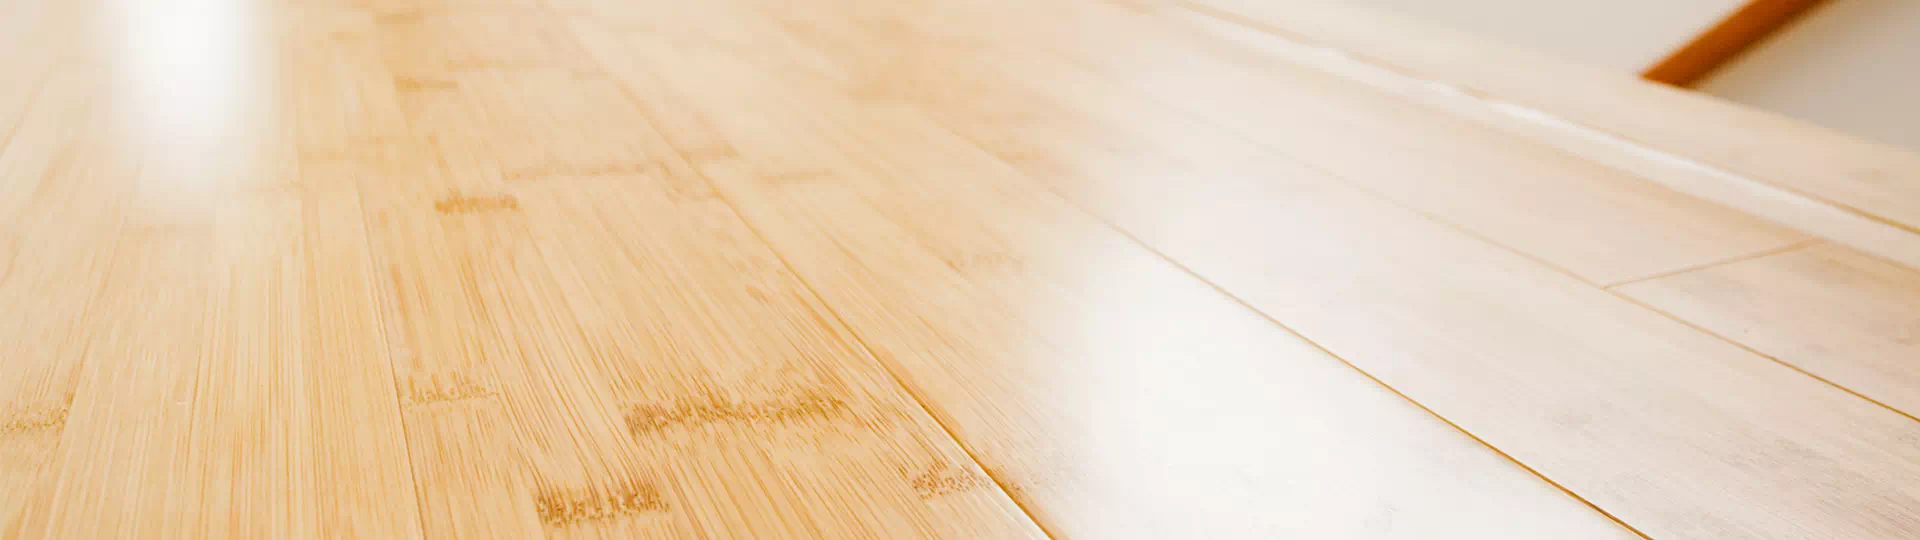 How To Clean Bamboo Floors Simple Green, Is Bamboo Flooring Non Toxic